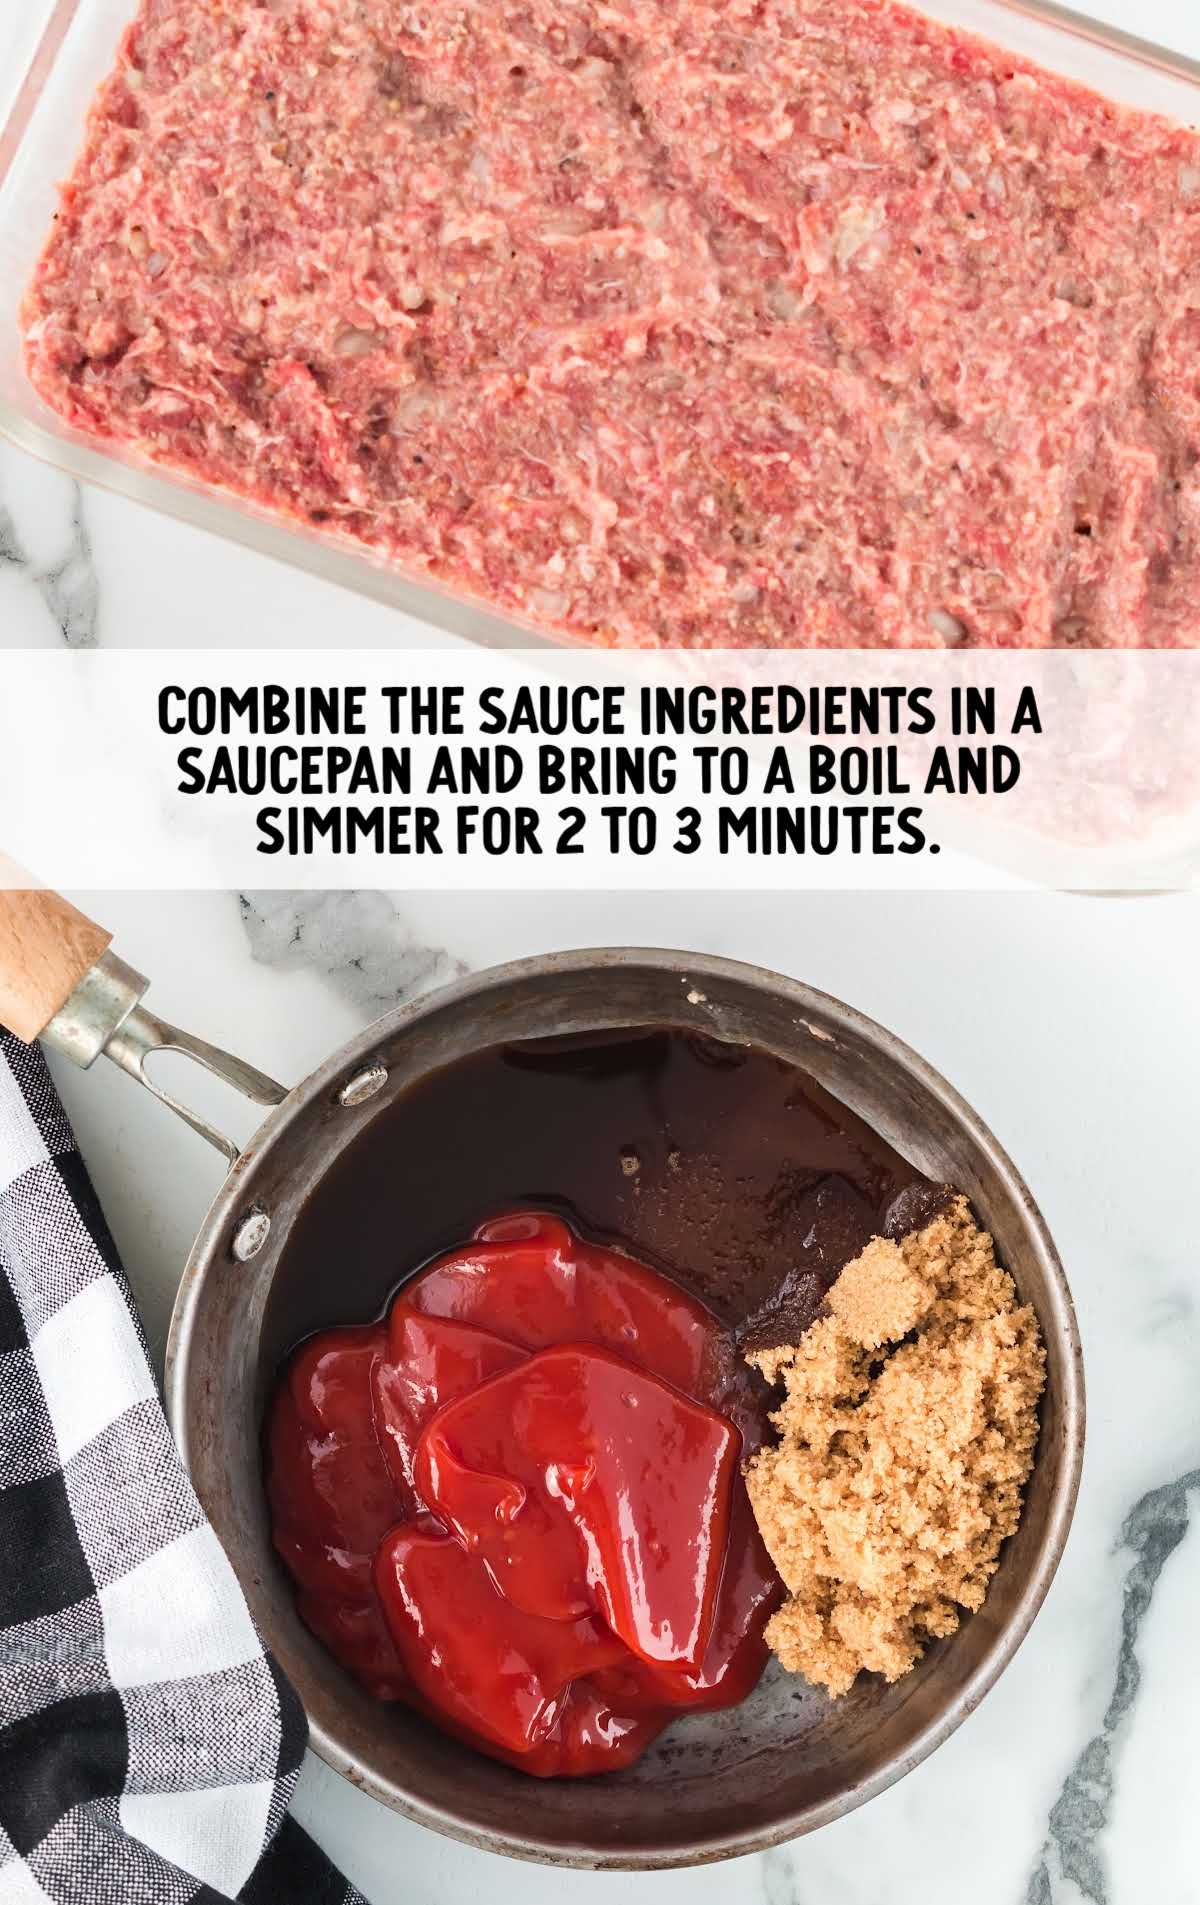 meatloaf in a baking dish and sauce ingredients being combined in a saucepan